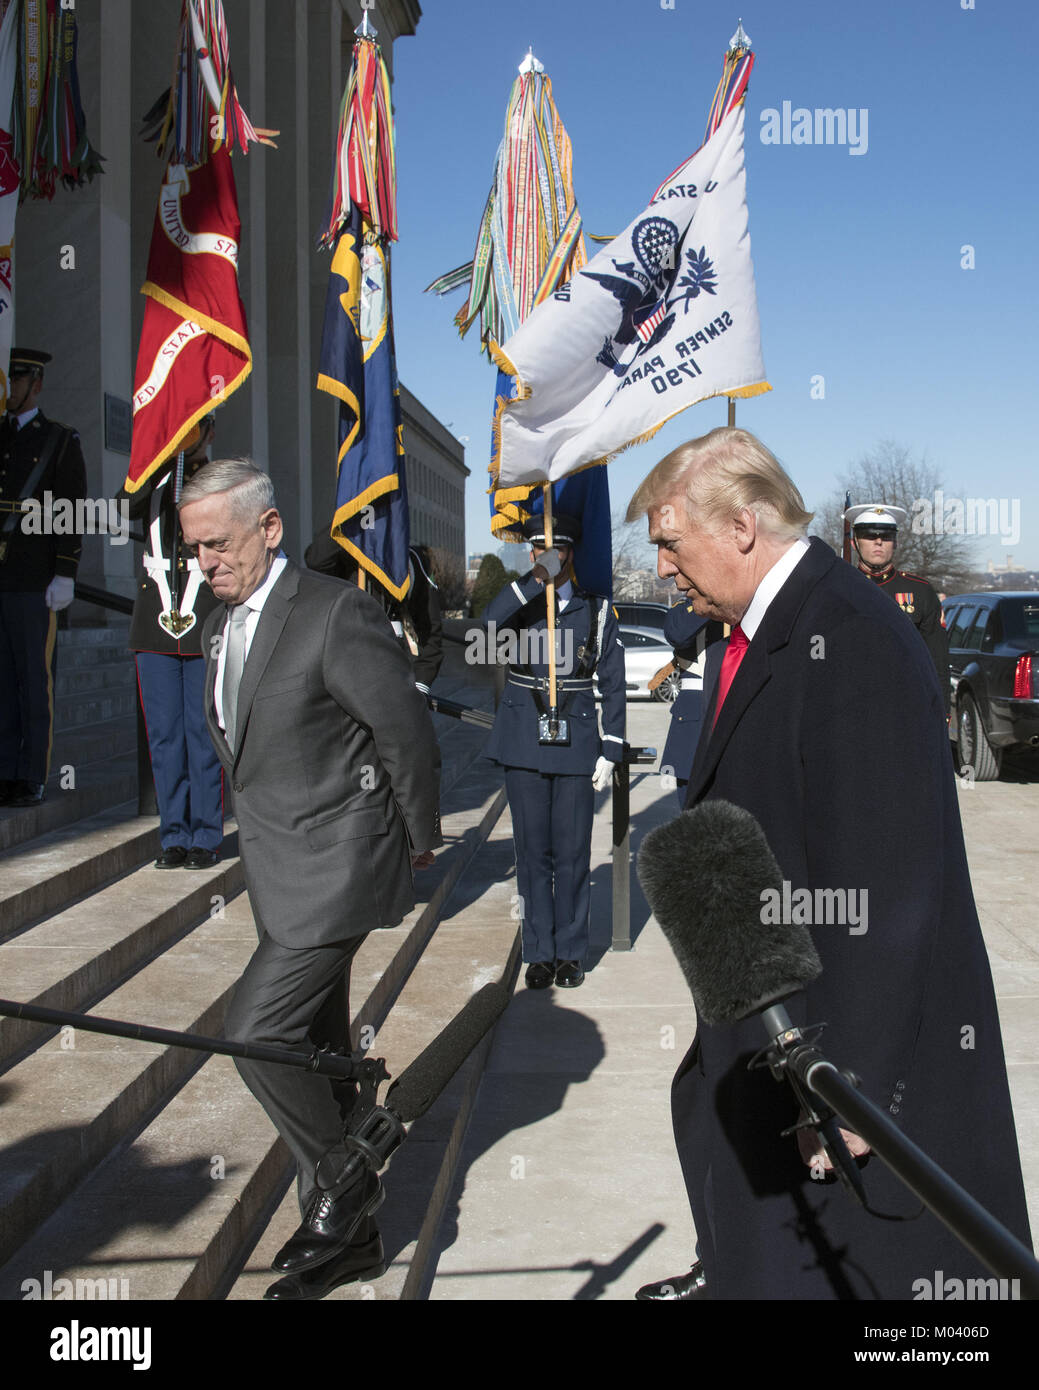 Washington, District of Columbia, USA. 18th Jan, 2018. United States President Donald J. Trump, accompanied by US Secretary of Defense Jim Mattis, left, walks up the steps into the Pentagon after making a statement in Washington, DC on Thursday, January 18, 2018.Credit: Ron Sachs/Pool via CNP Credit: Ron Sachs/CNP/ZUMA Wire/Alamy Live News Stock Photo